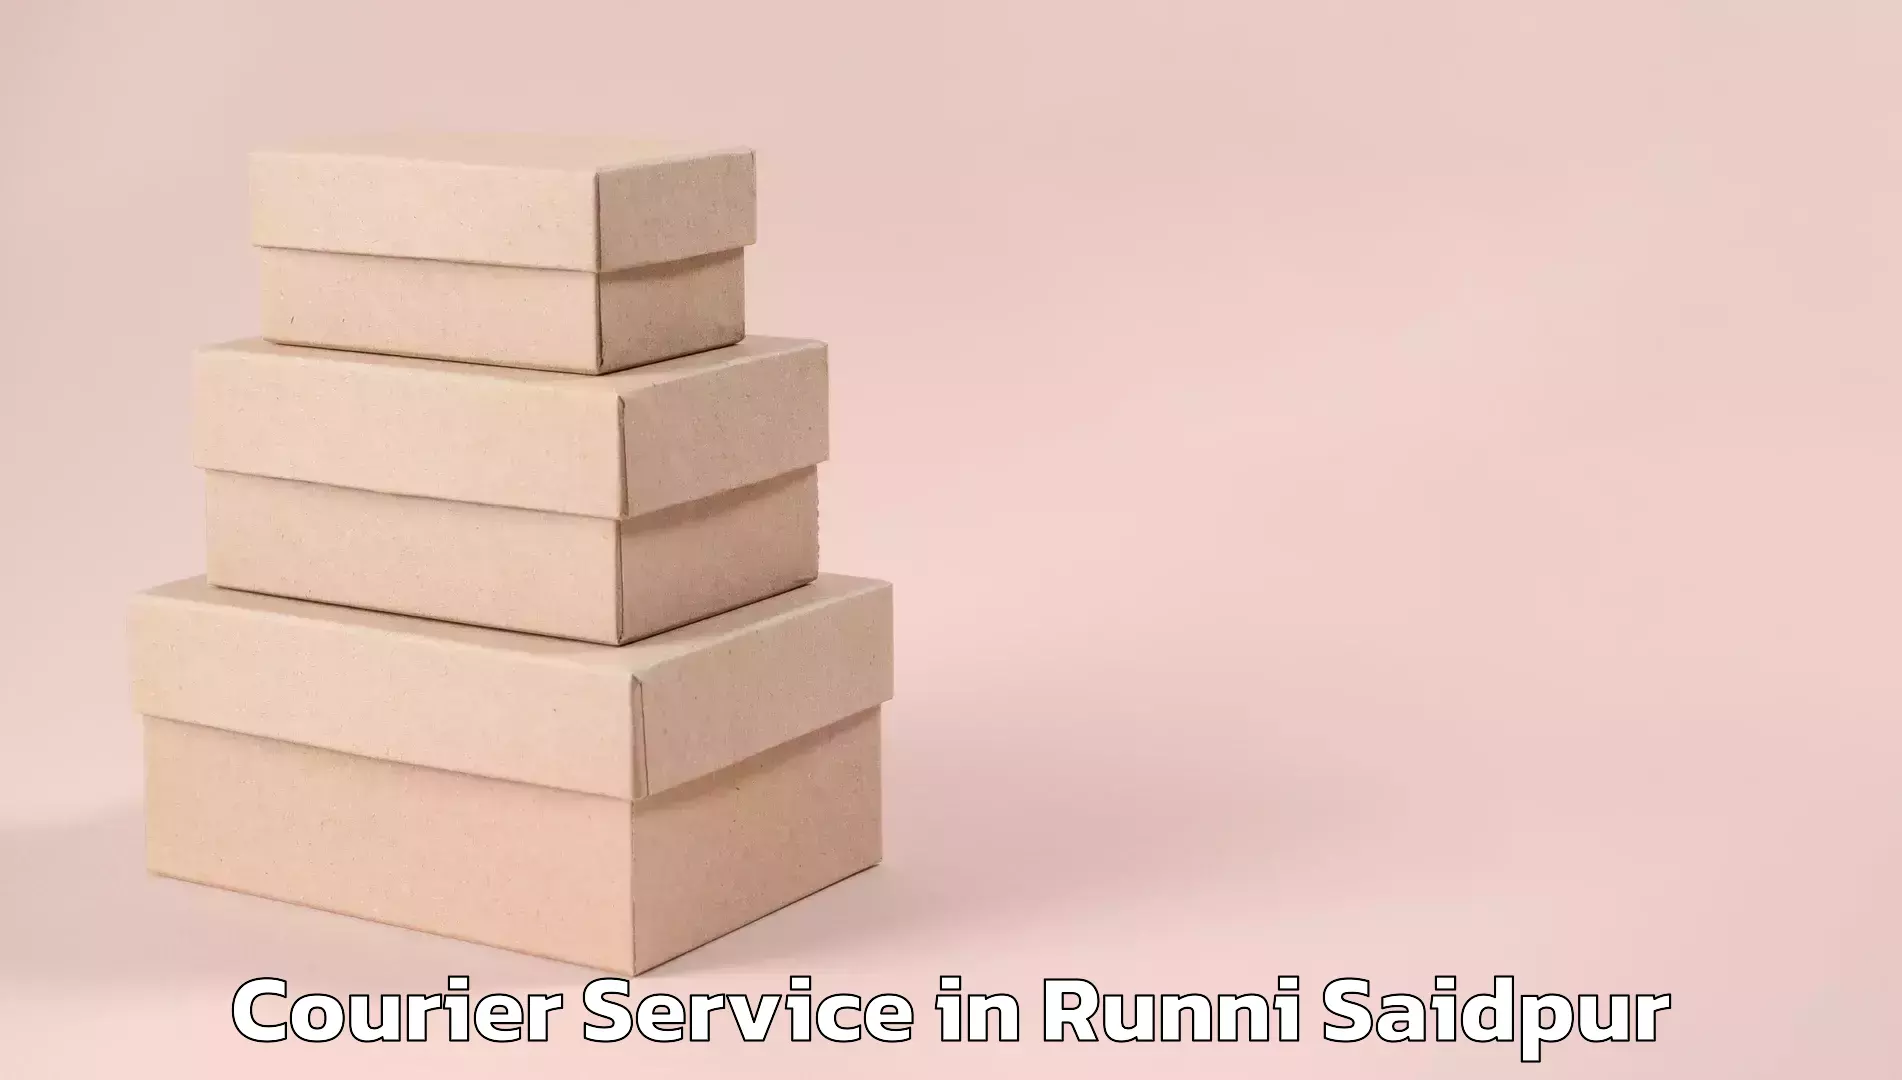 Quality courier services in Runni Saidpur